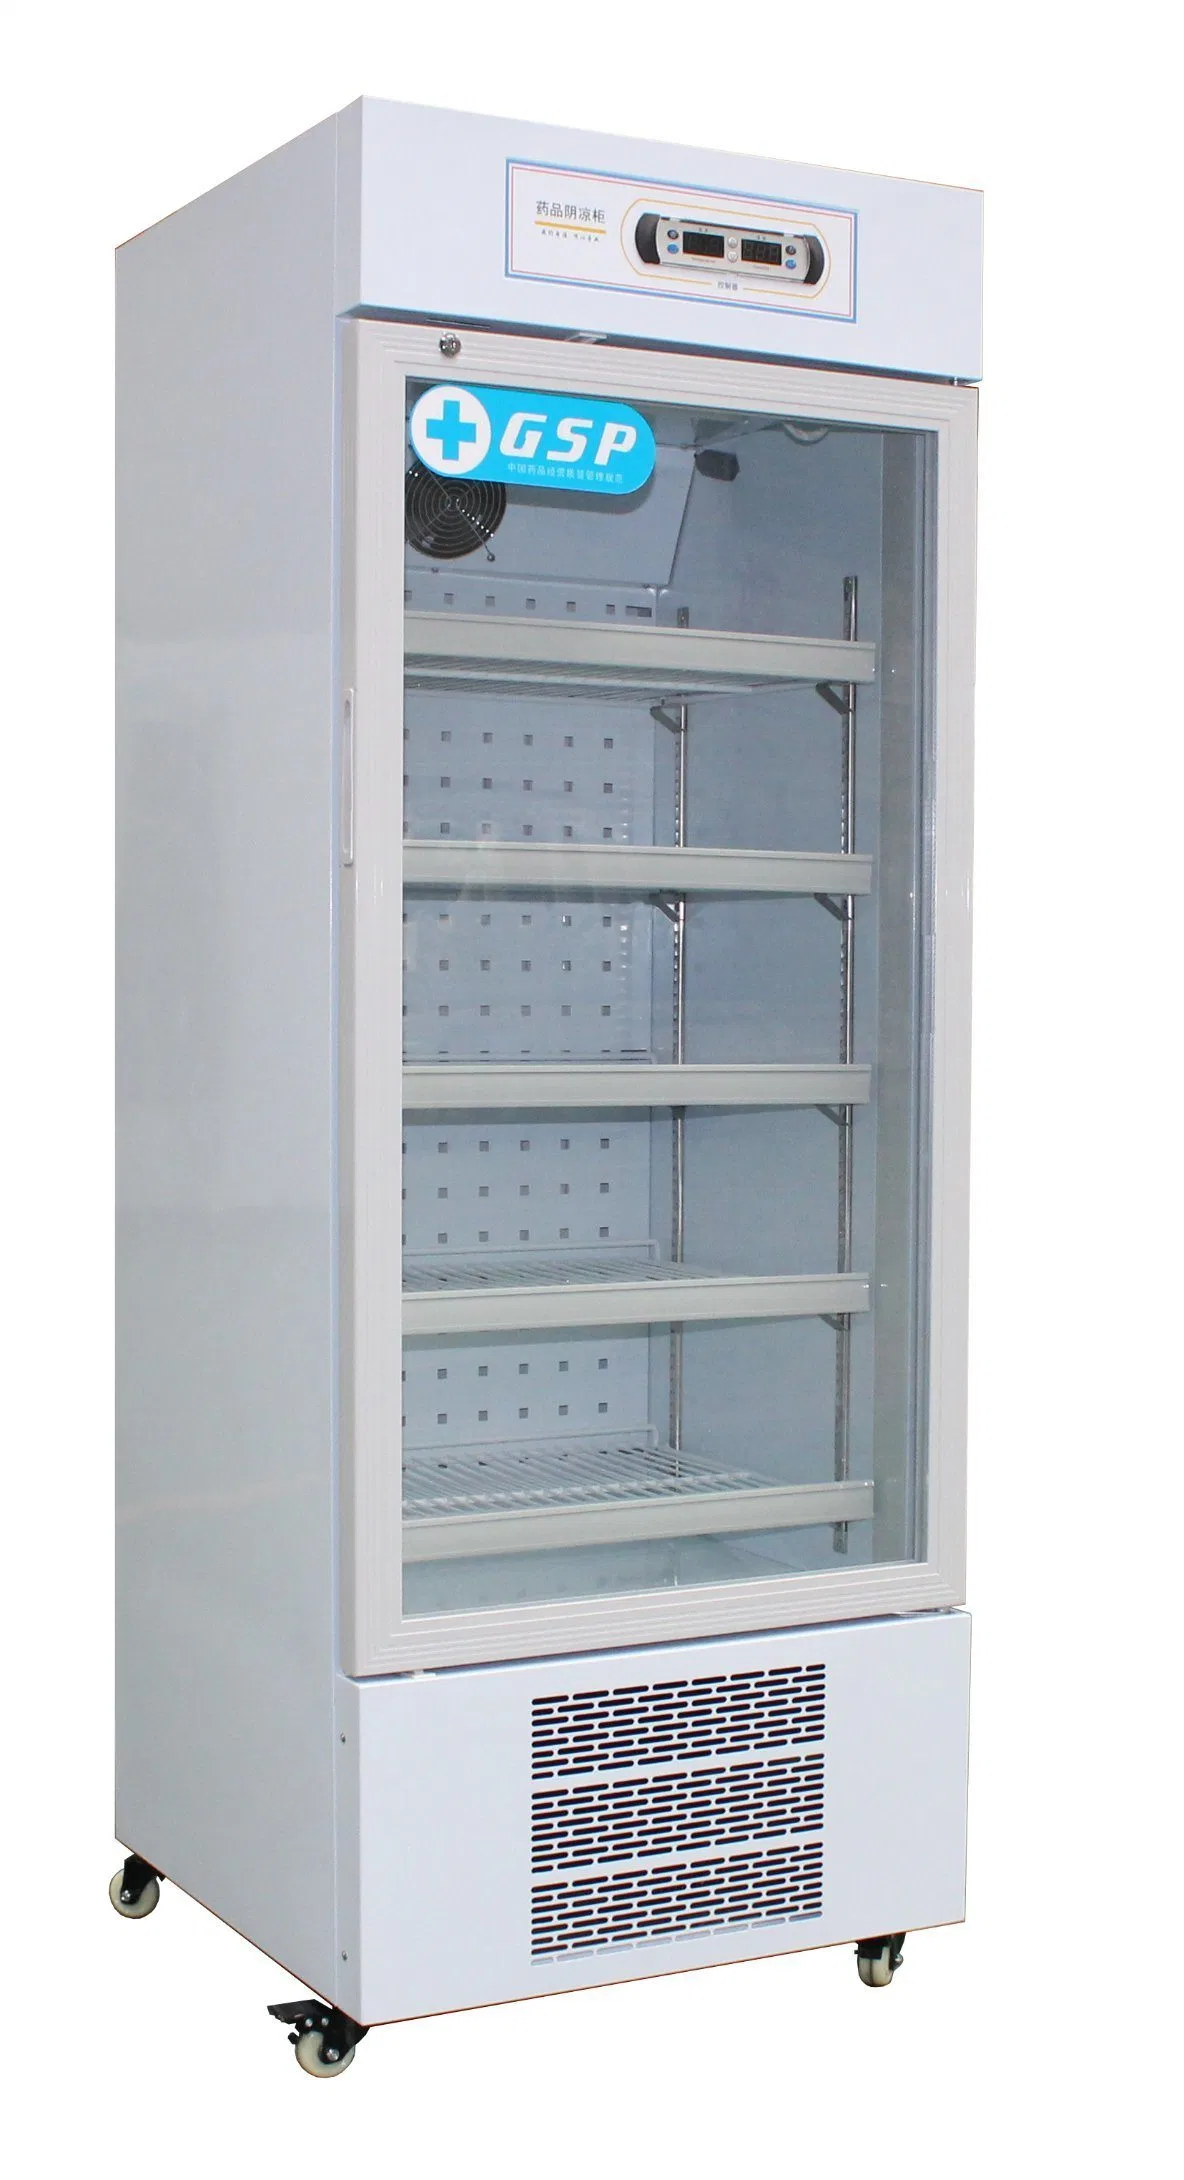 2-8 Degree Medical Refrigerator Temperature of a Freezer with CE Confimed